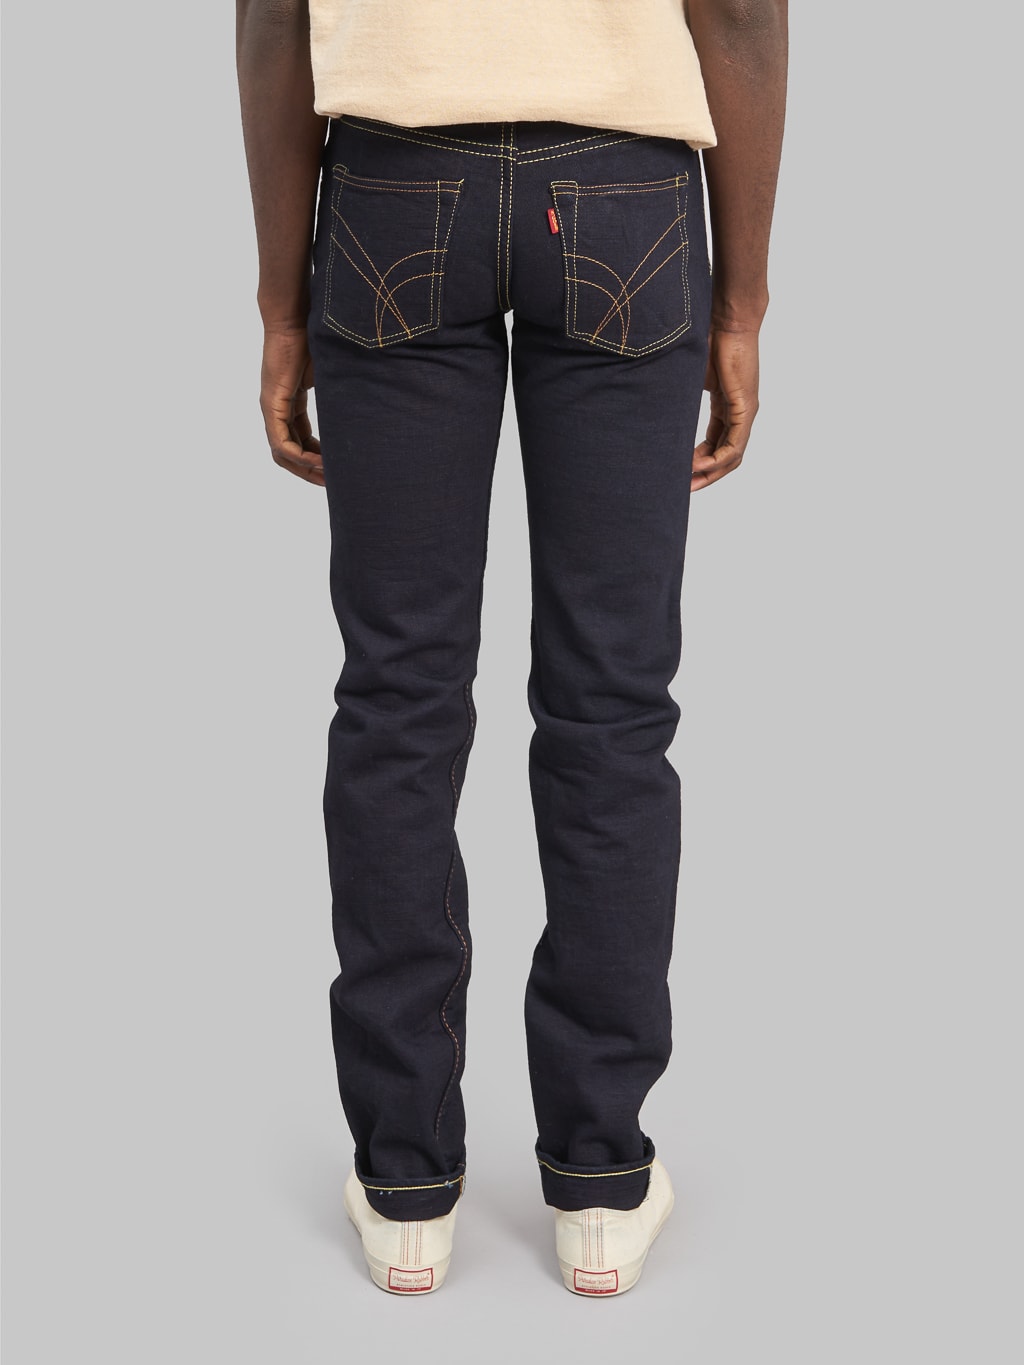 The Strike Gold 5004ID double indigo straight tapered selvedge jeans back rise